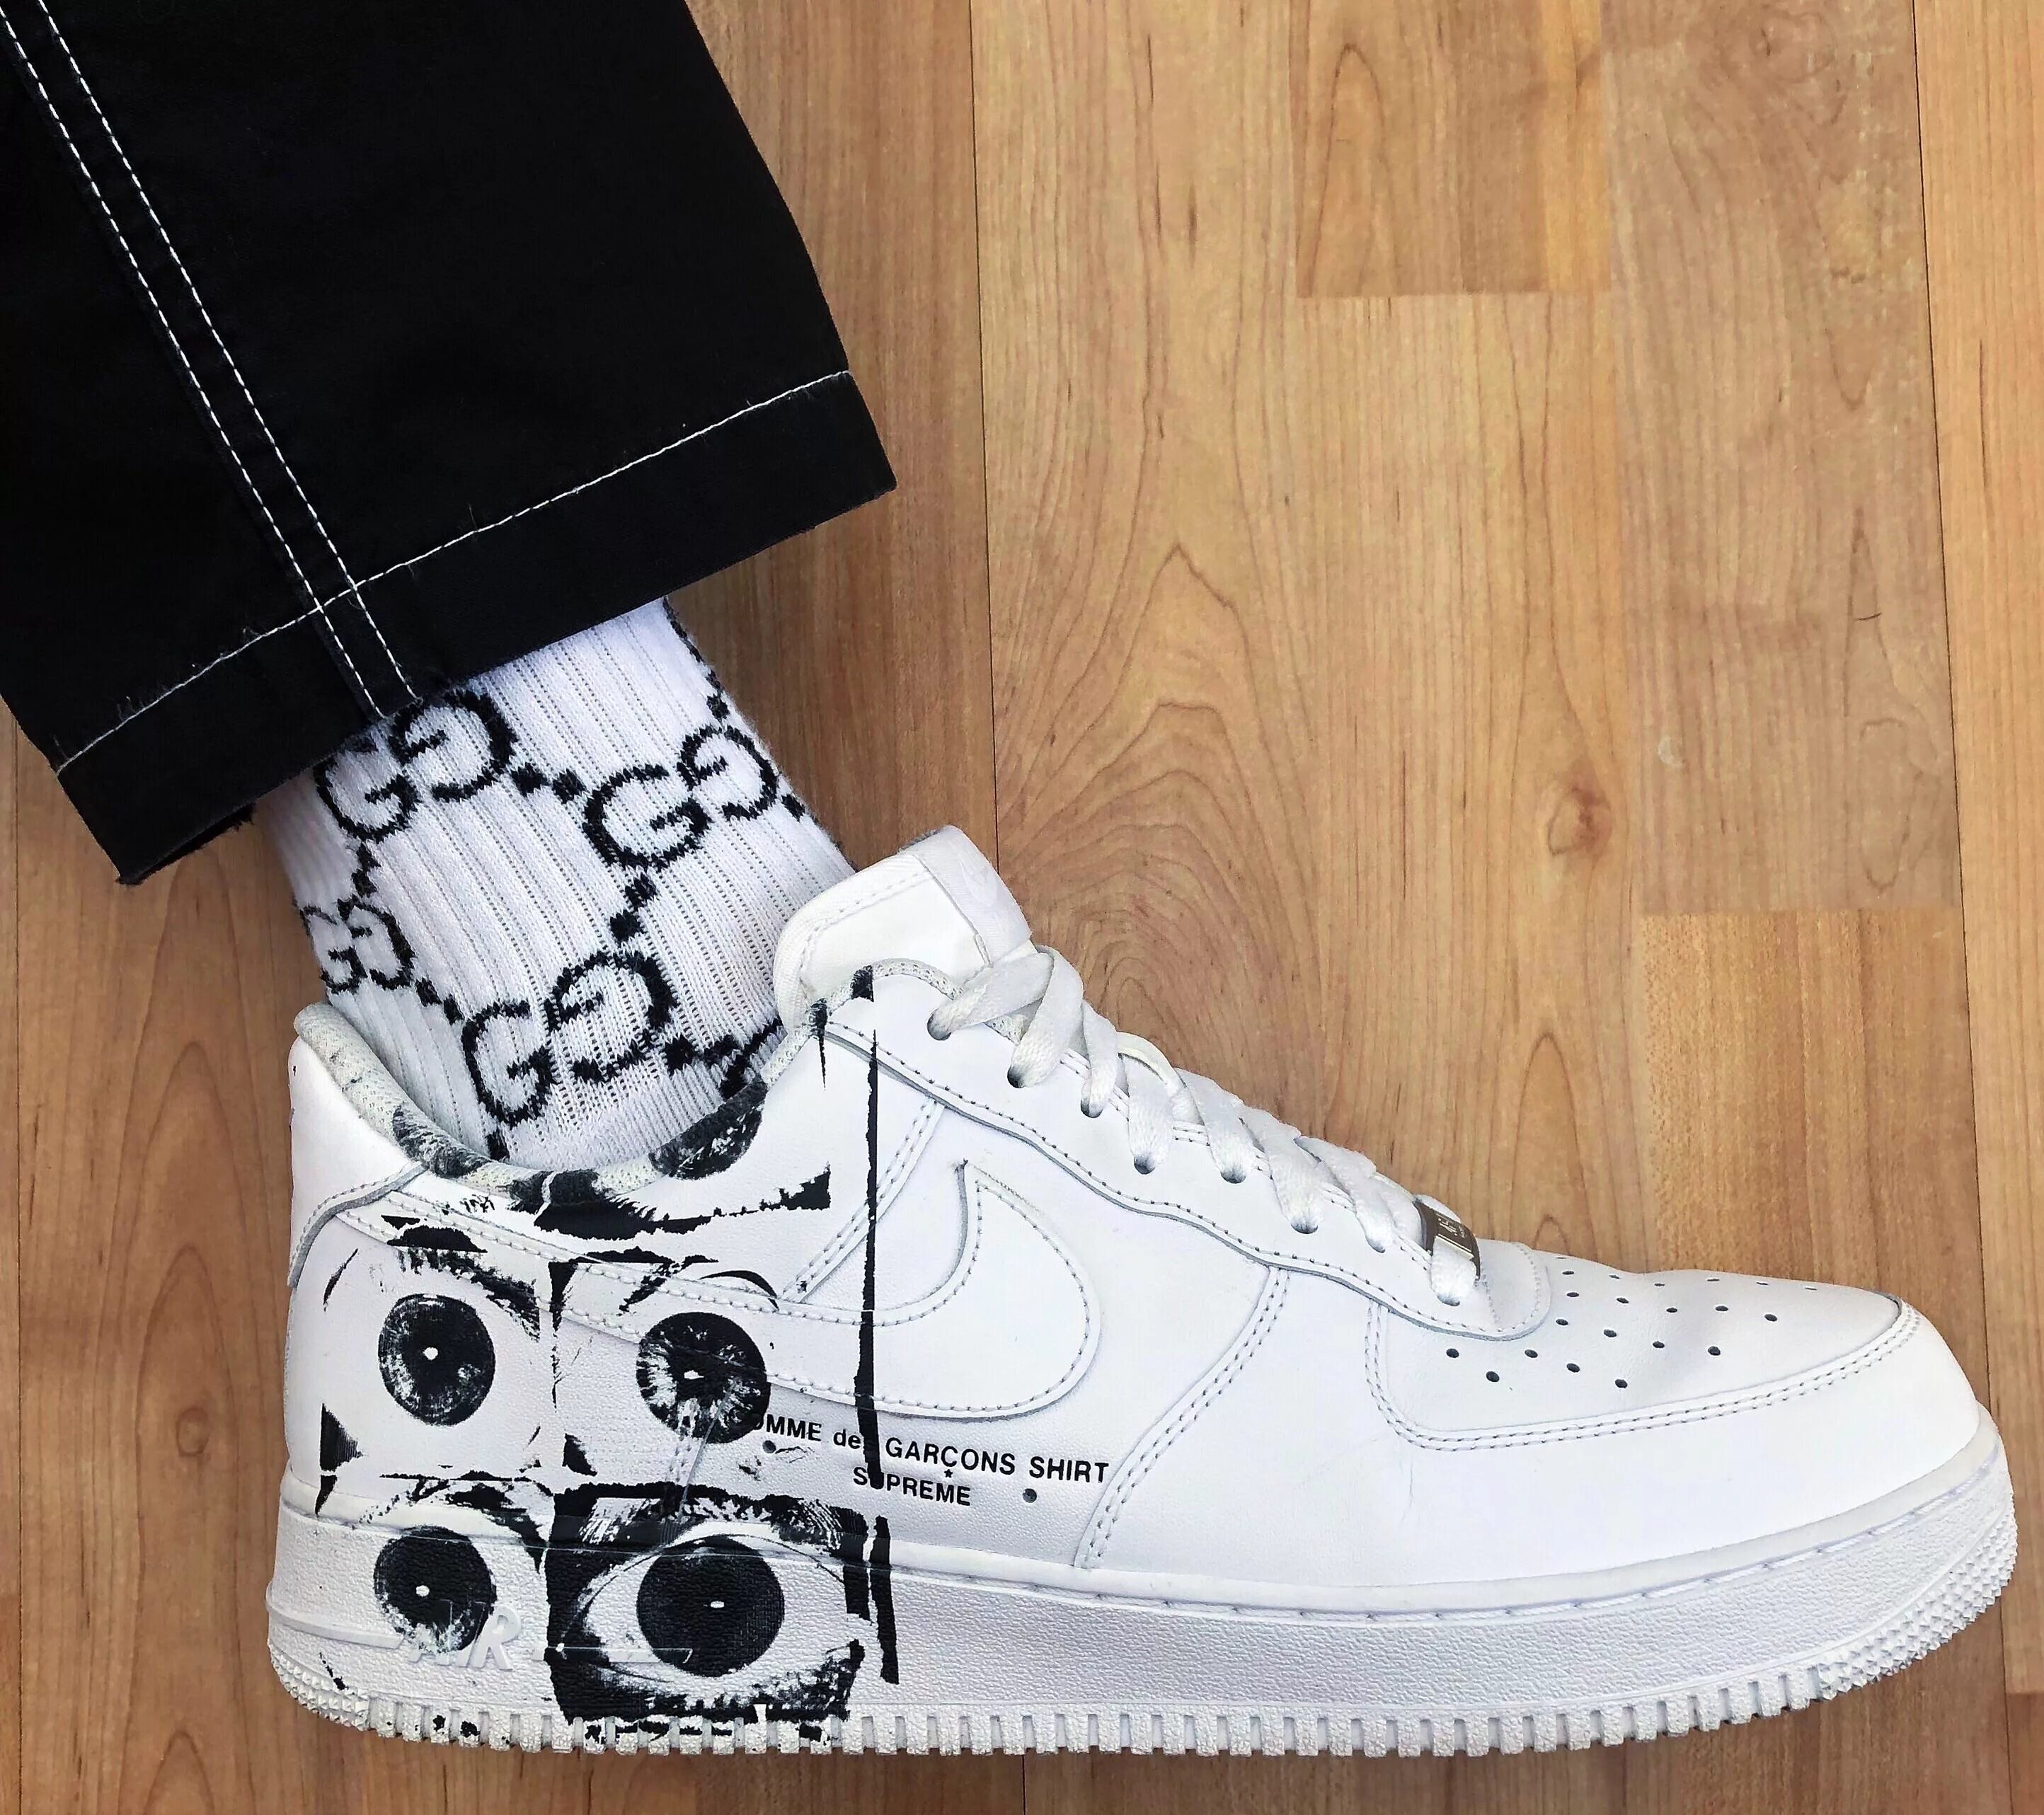 Air force 1 supreme. Nike Air Force 1 Supreme comme des garcons. Nike Air Force 1 Low Supreme. Nike Air Force 1 CDG. Nike Air Force 1 Supreme.